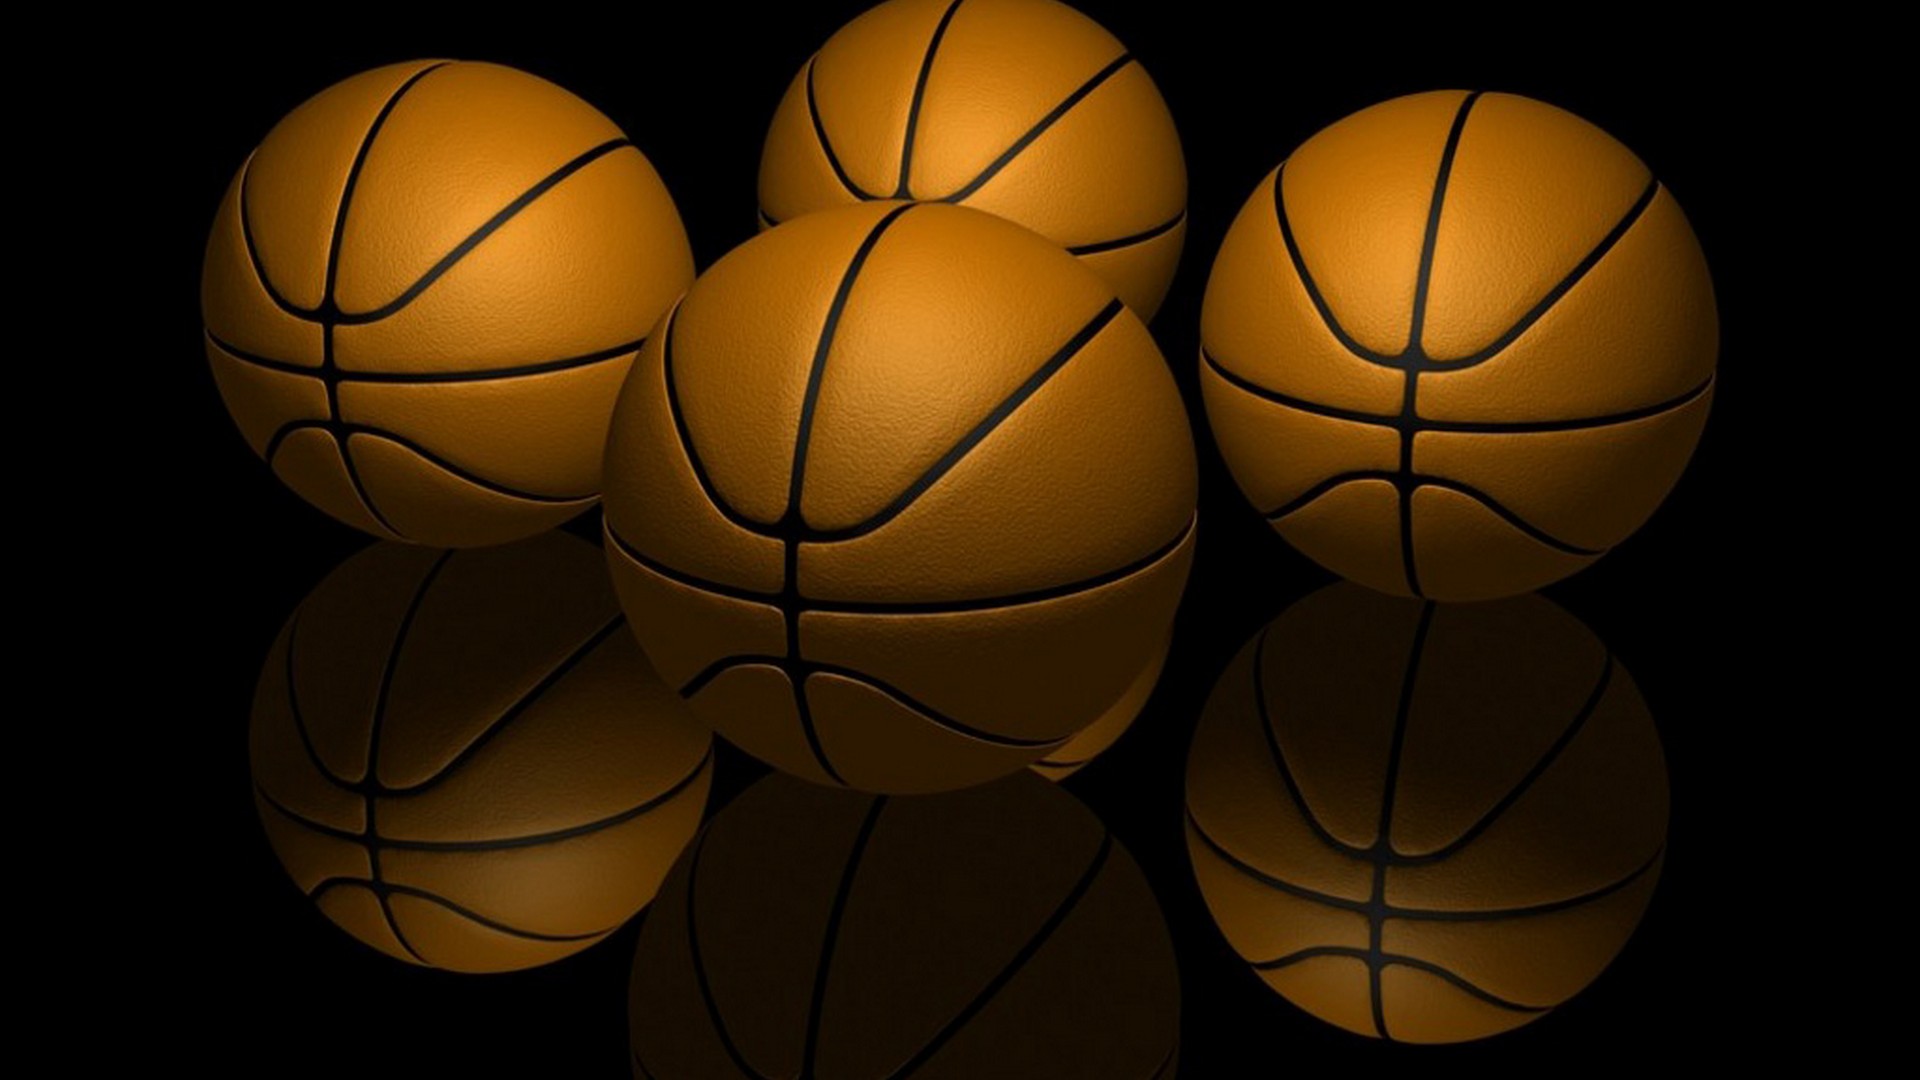 Basketball Games Desktop Wallpapers with image dimensions 1920X1080 pixel. You can make this wallpaper for your Desktop Computer Backgrounds, Windows or Mac Screensavers, iPhone Lock screen, Tablet or Android and another Mobile Phone device